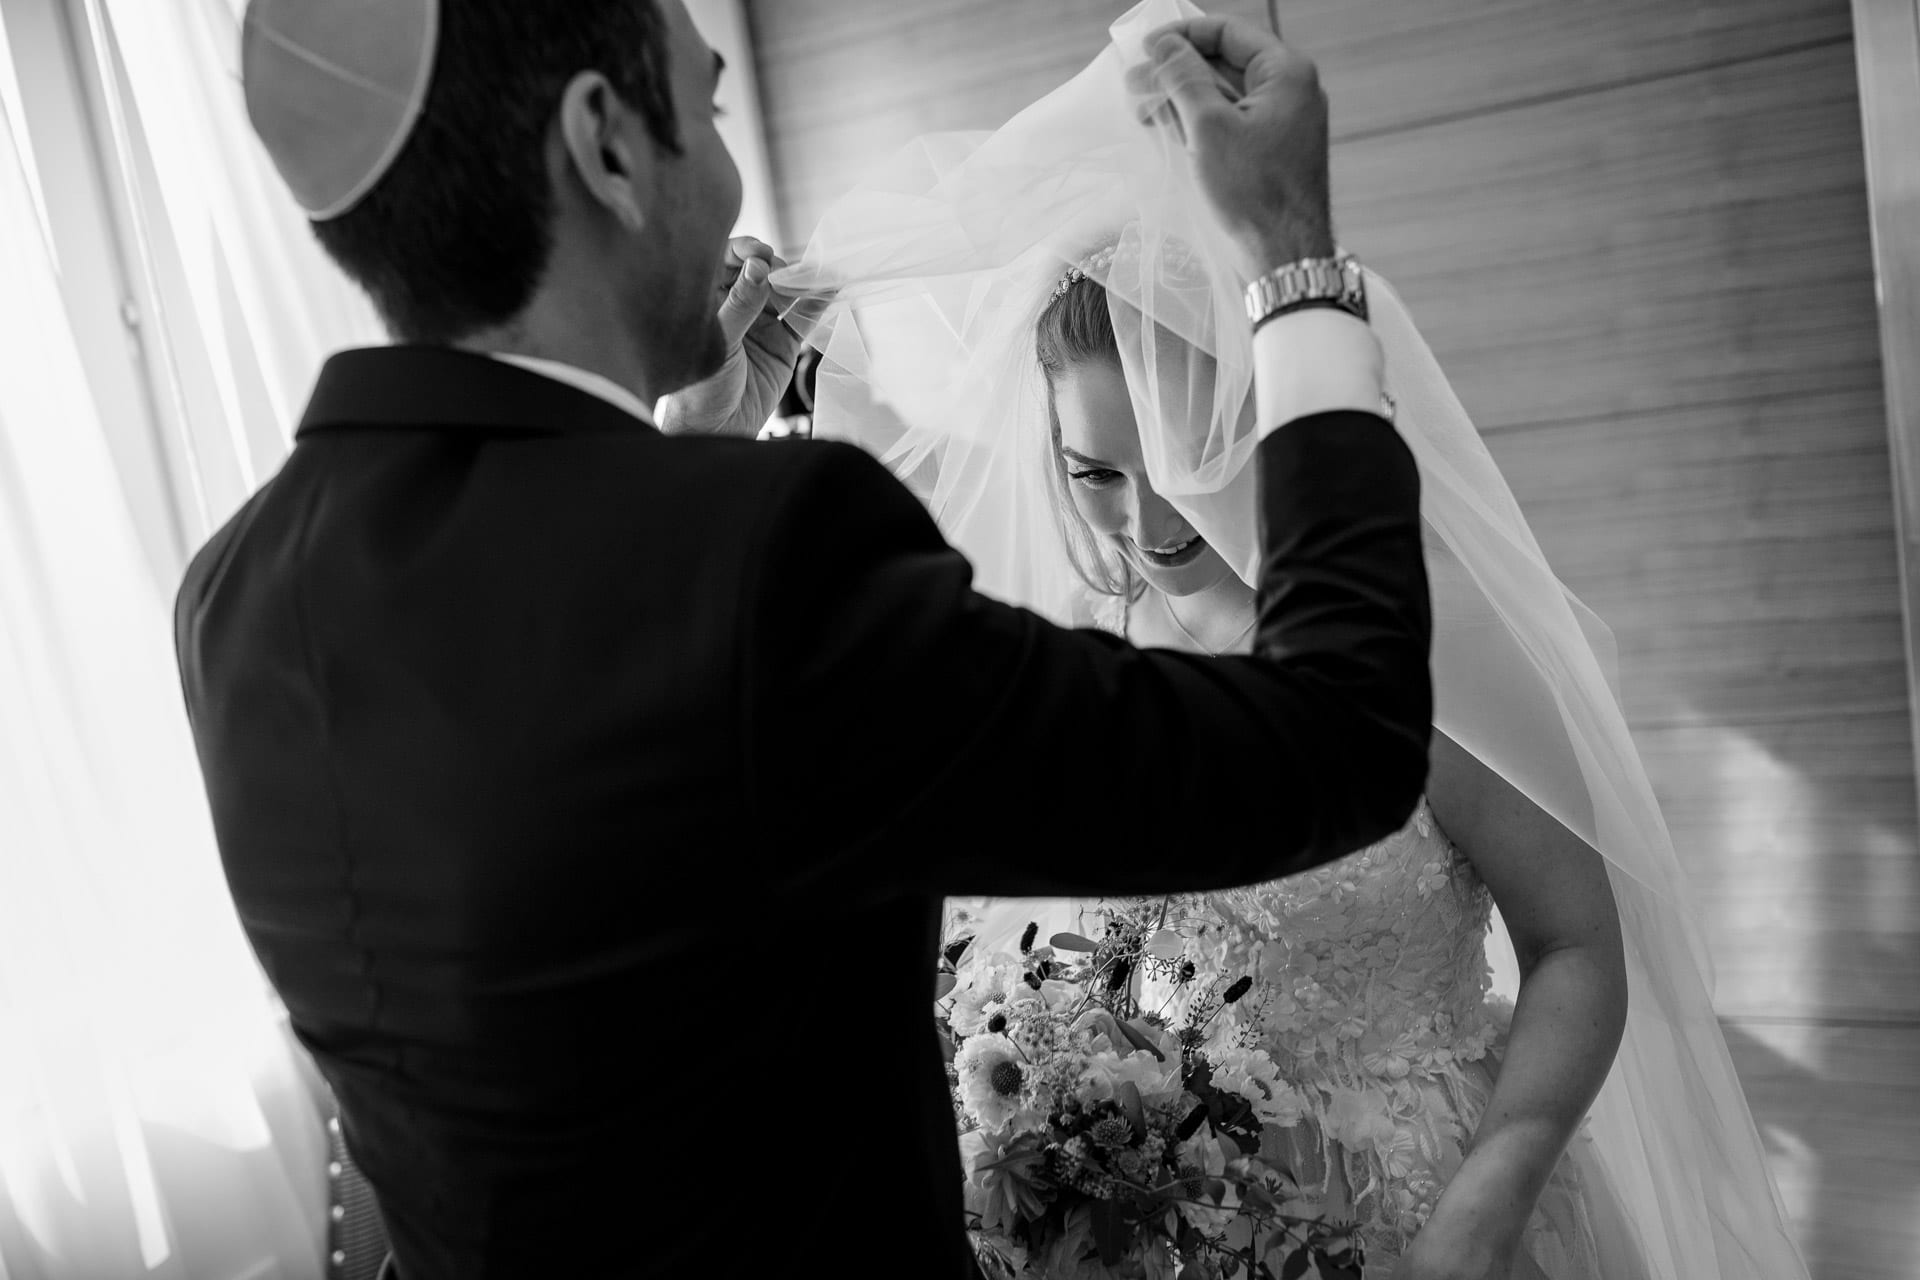 lifting the veil at a bedeken ceremony